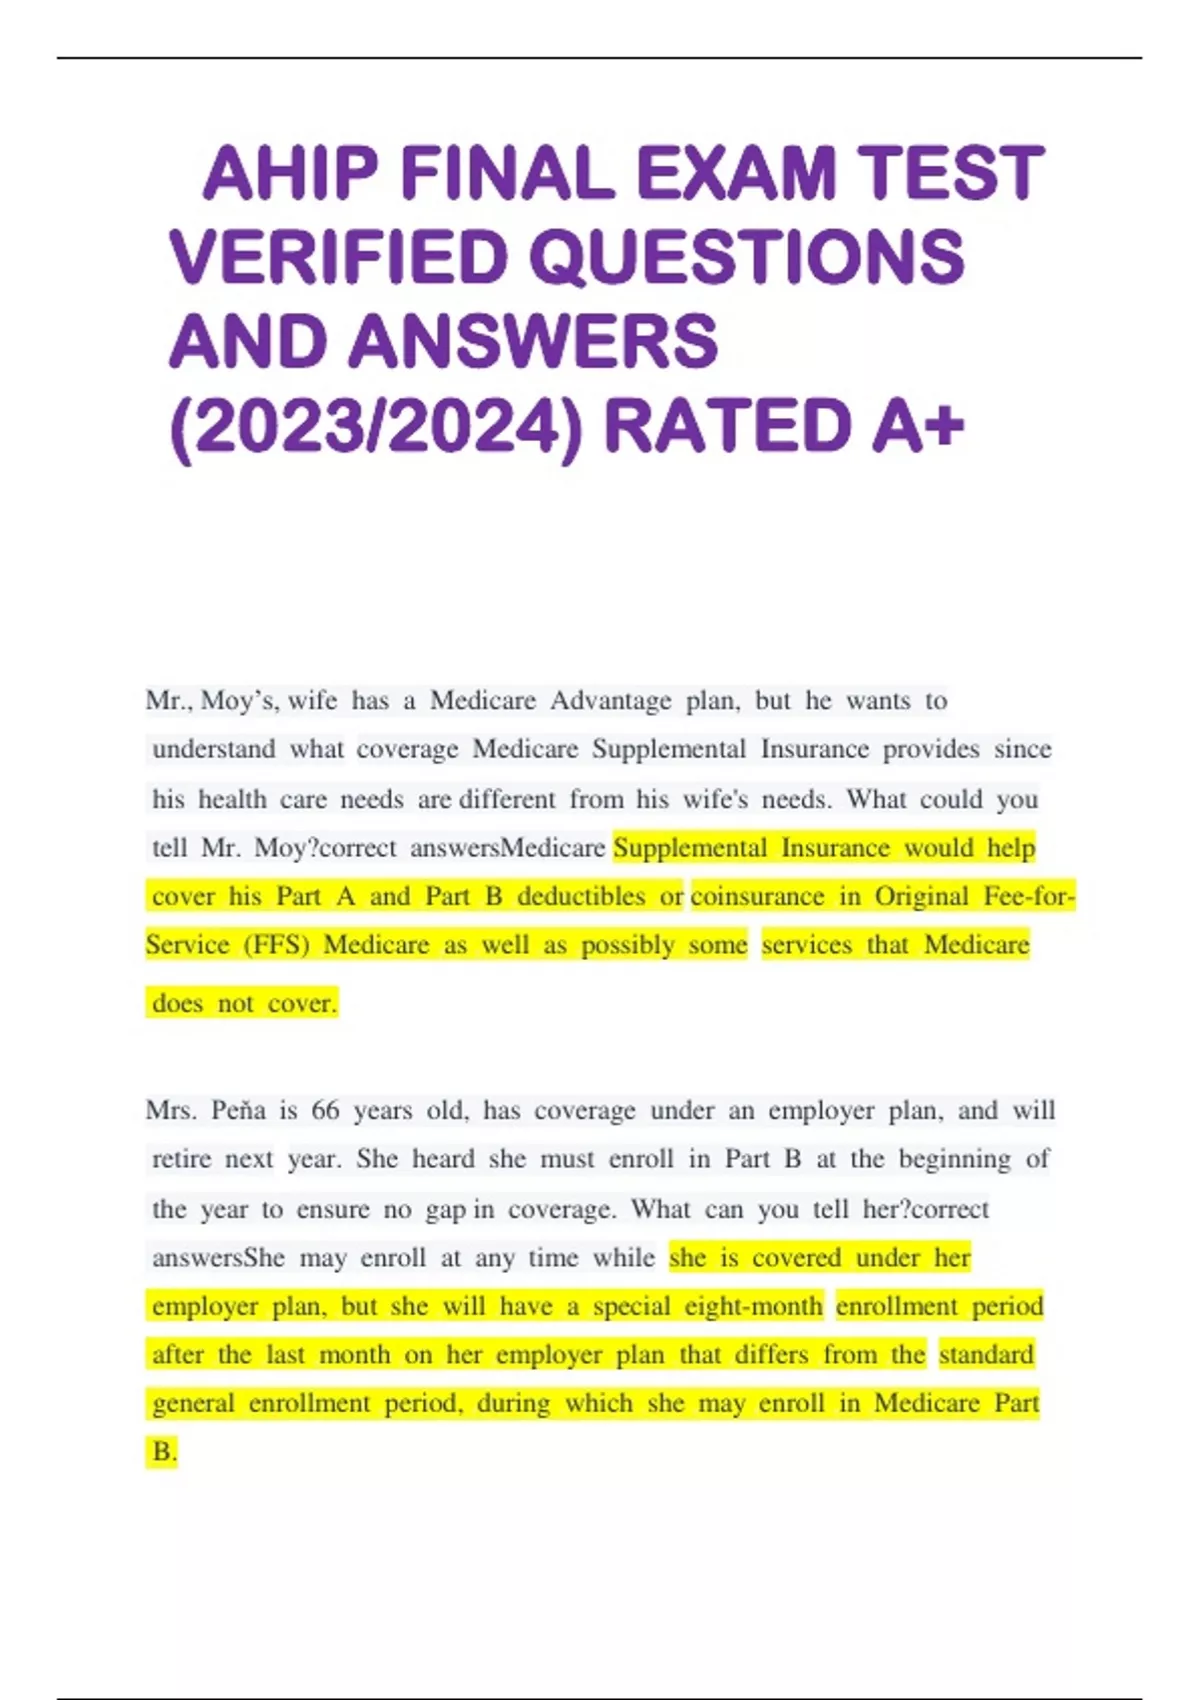 AHIP FINAL EXAM TEST VERIFIED QUESTIONS AND ANSWERS (2023/2024) RATED A+ Stuvia US